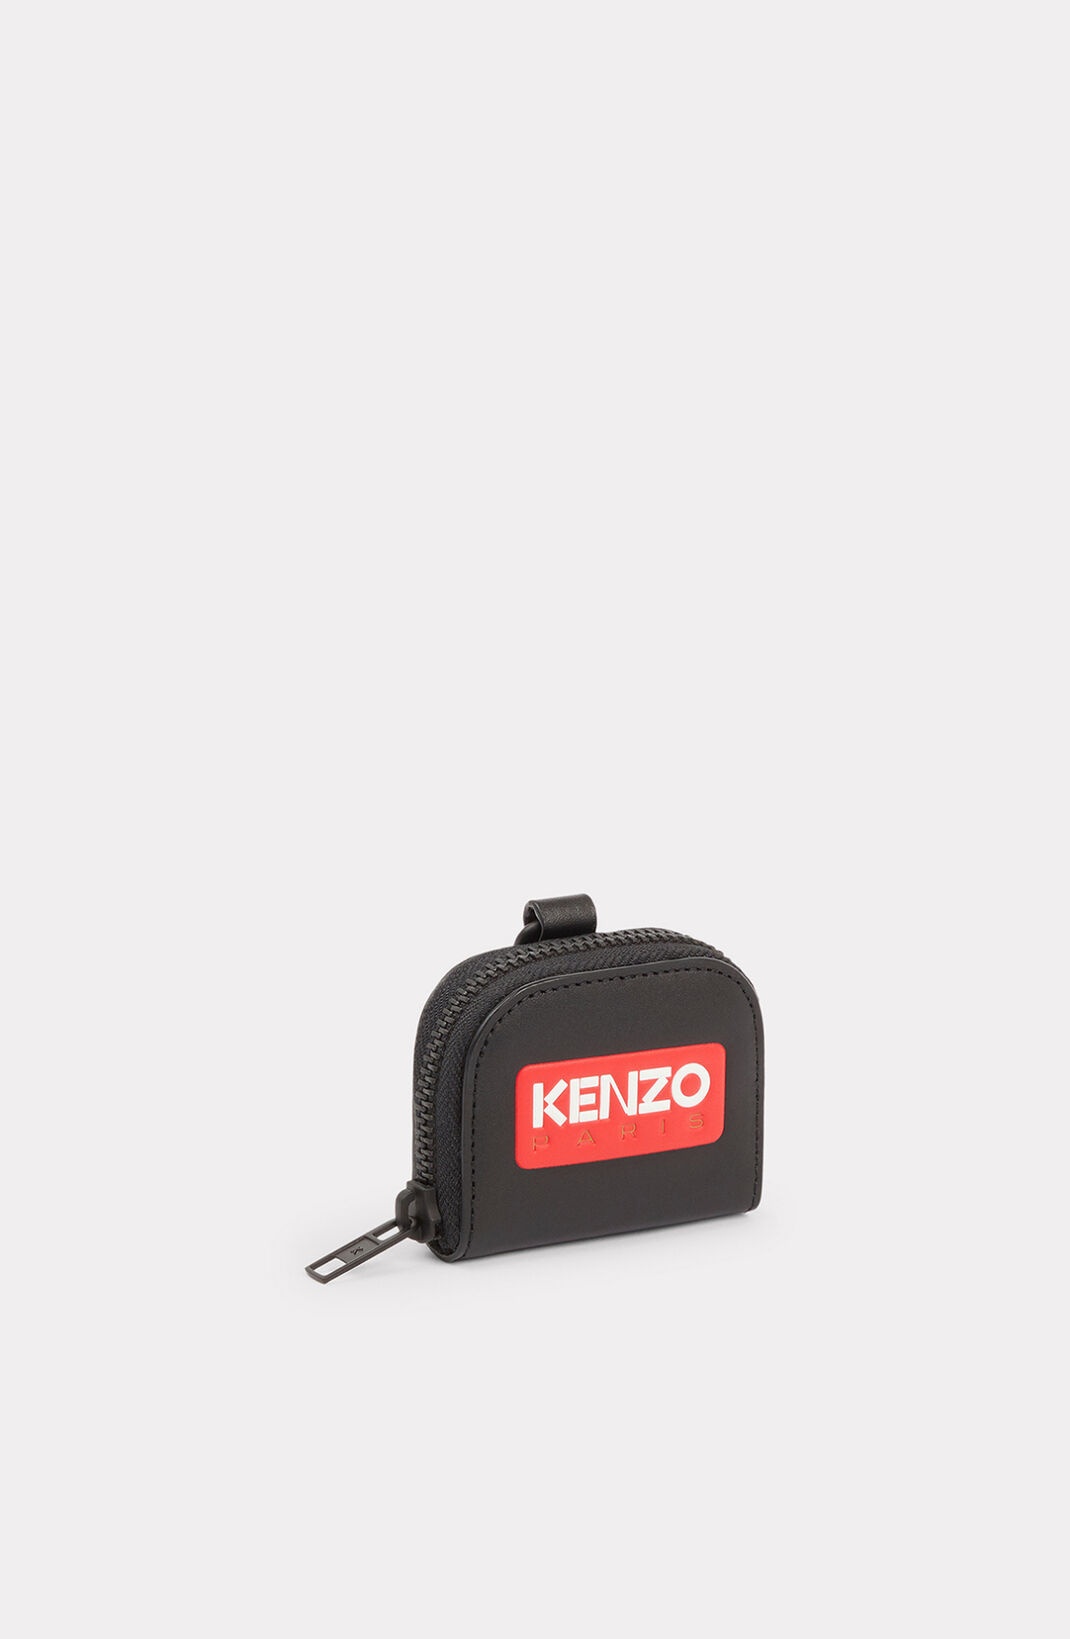 KENZO Paris leather AirPods case - 1